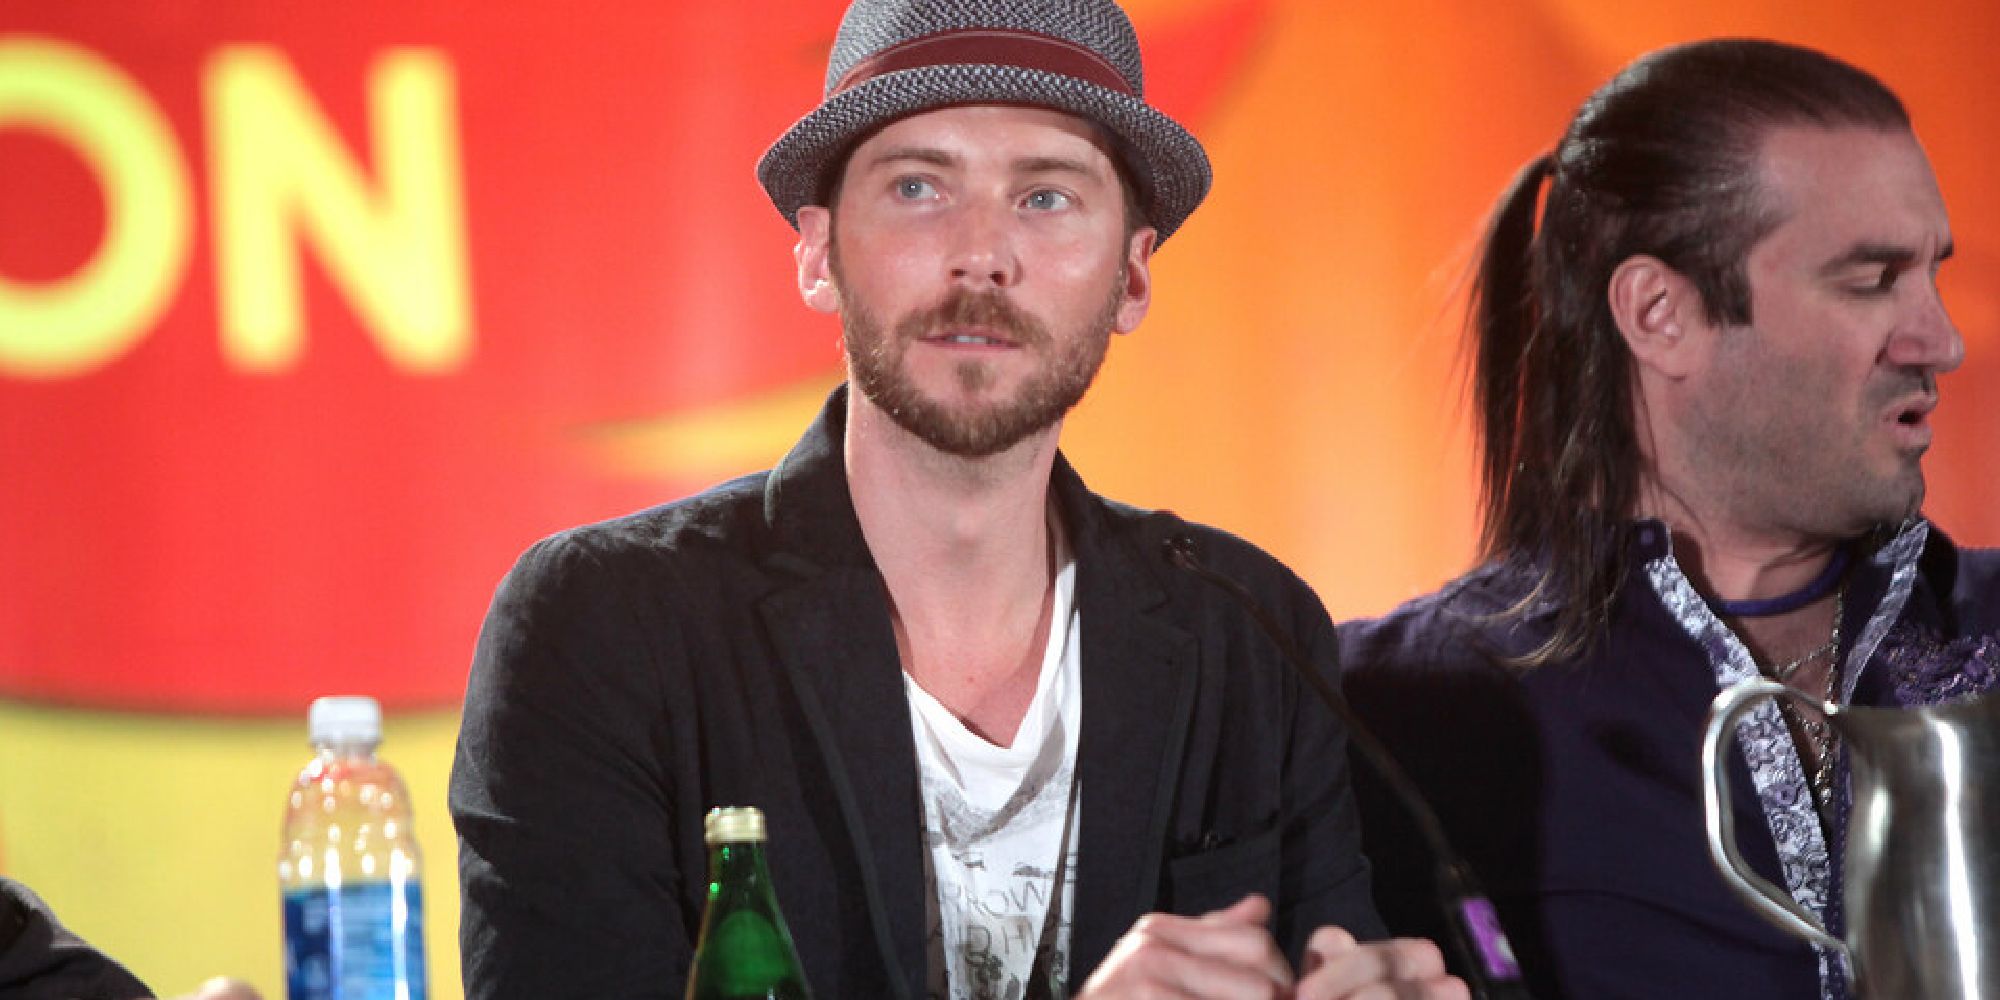 Voice Actor Troy Baker Pulls Out of NFT Partnership [Update] - IGN